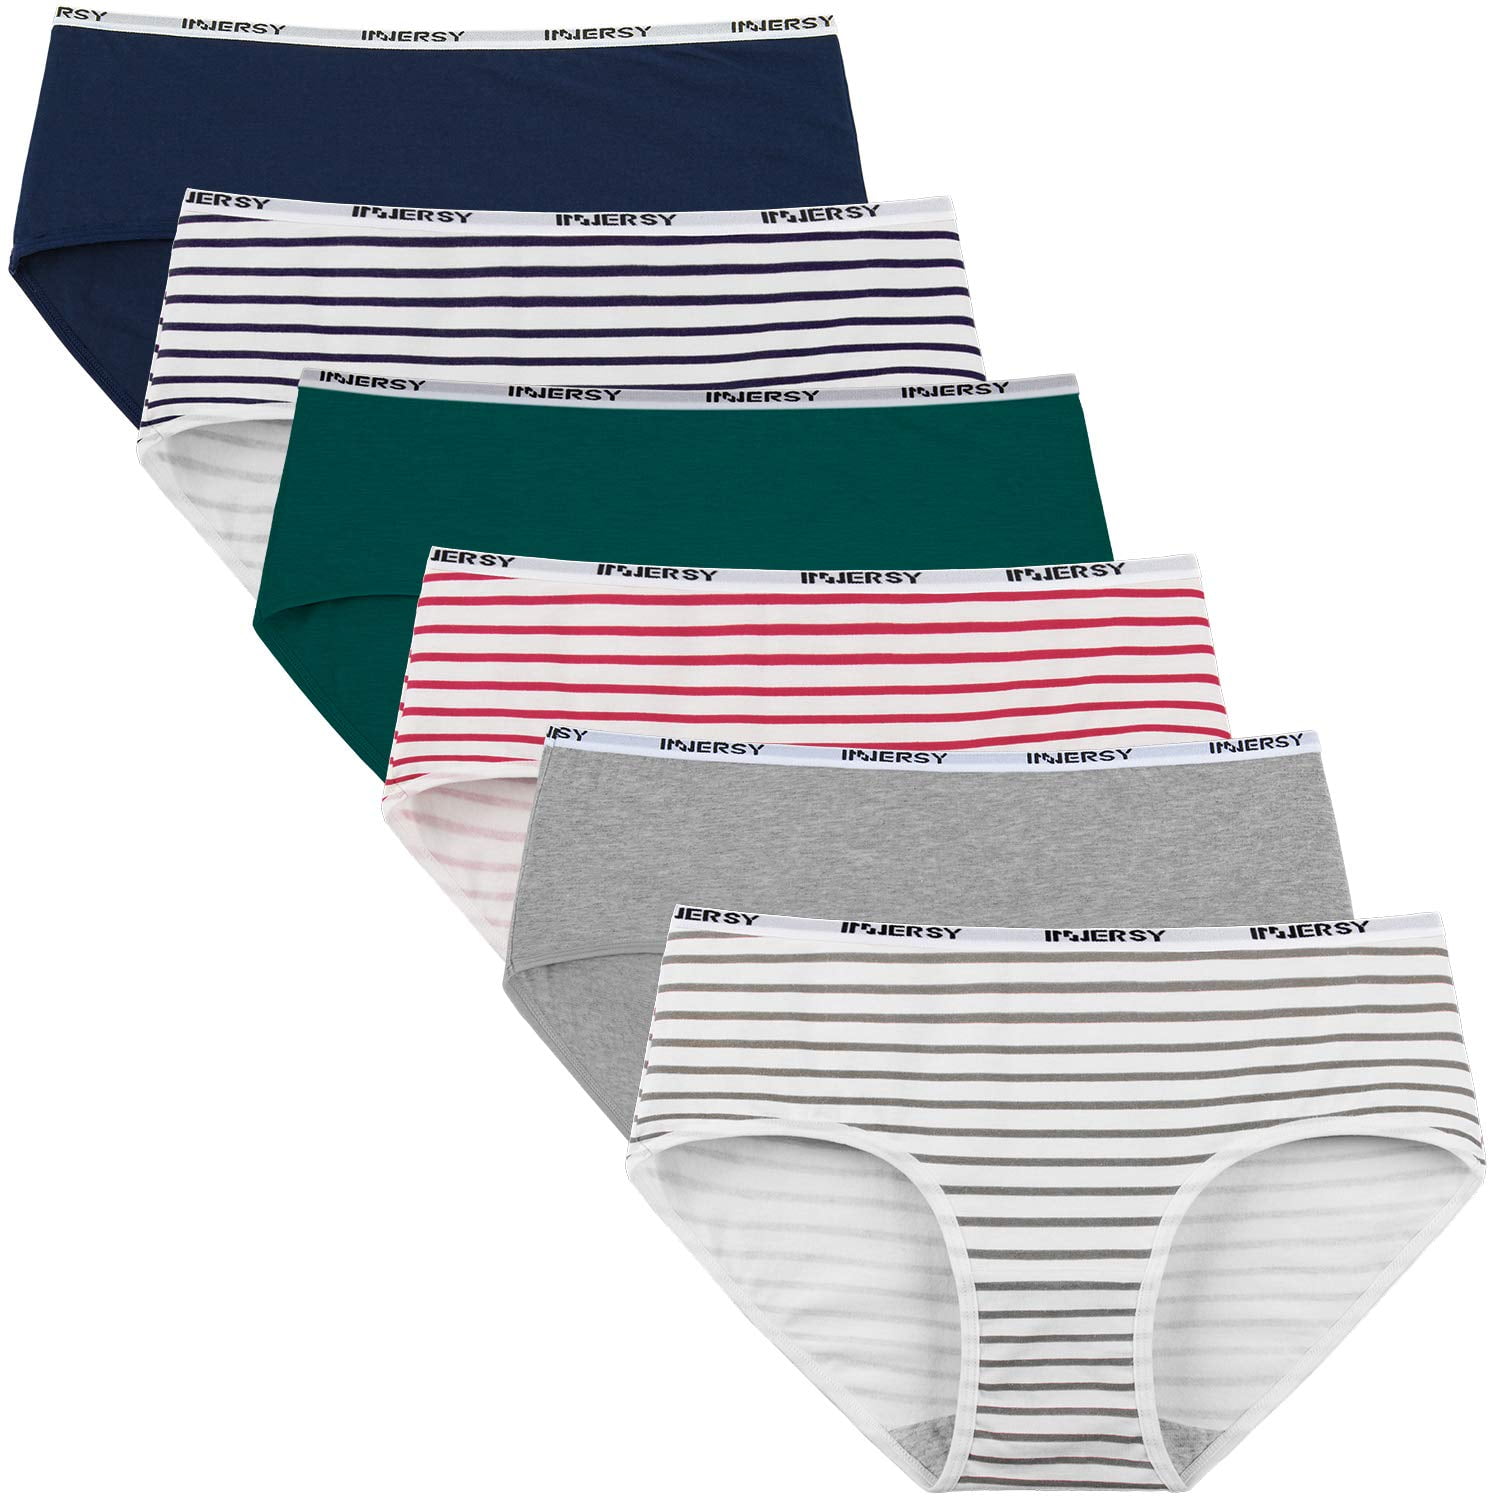 INNERSY Women's Sporty Hipster Panties Cotton Underwear Multicolored  6-Pack(Colored Rose,X-Small) at  Women's Clothing store